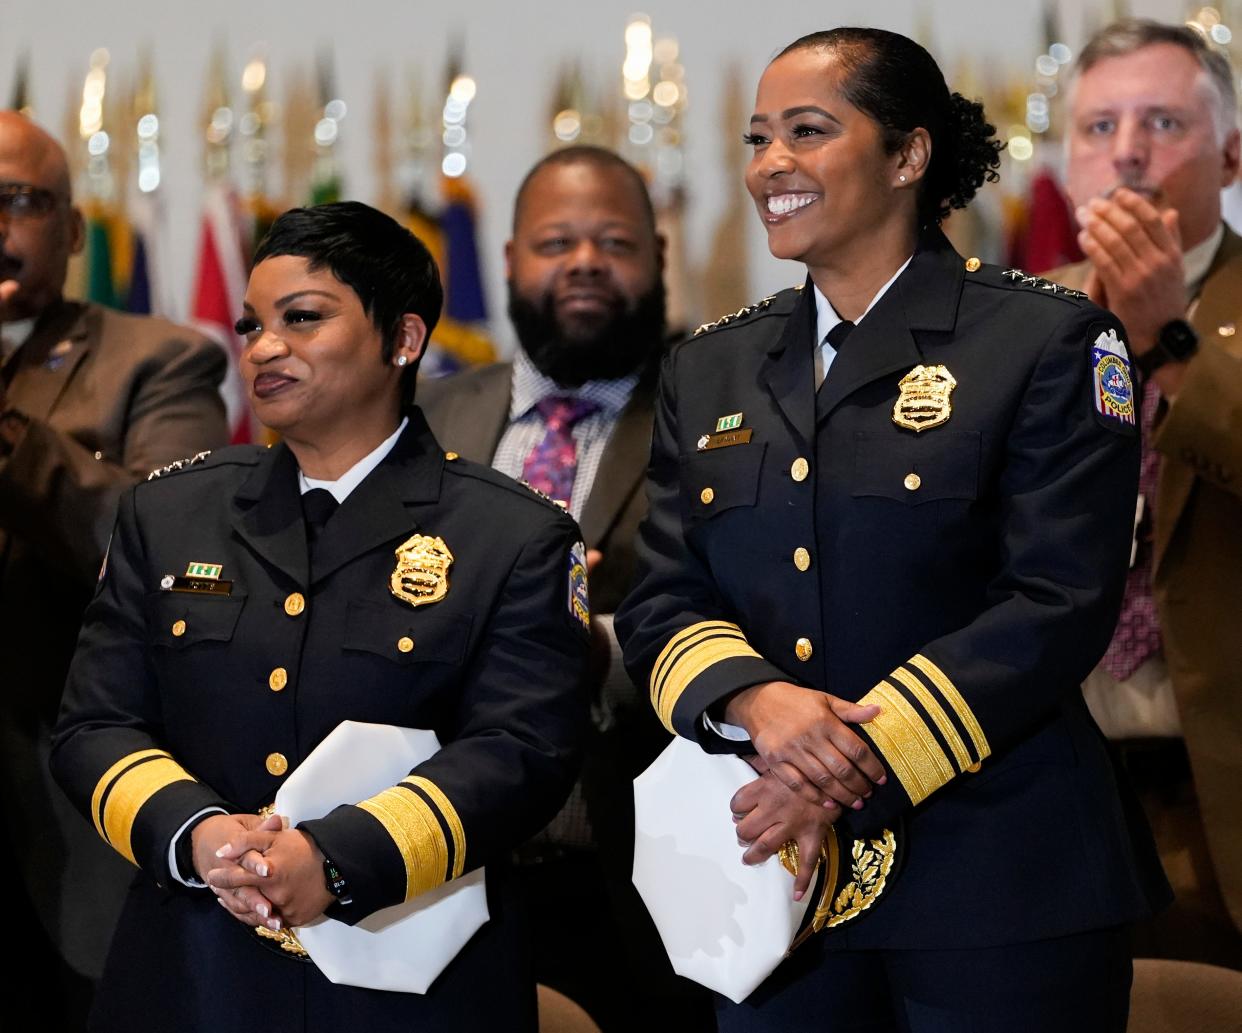 Columbus police Chief Elaine Bryant, right, and First Assistant Chief LaShanna Potts, left, are recognized at their ceremonial swearing-in April 5 after completion of their Ohio Peace Officers Training at the James G. Jackson Columbus Police Academy. Bryant was named chief in June 2021 and Potts joined her later that year.